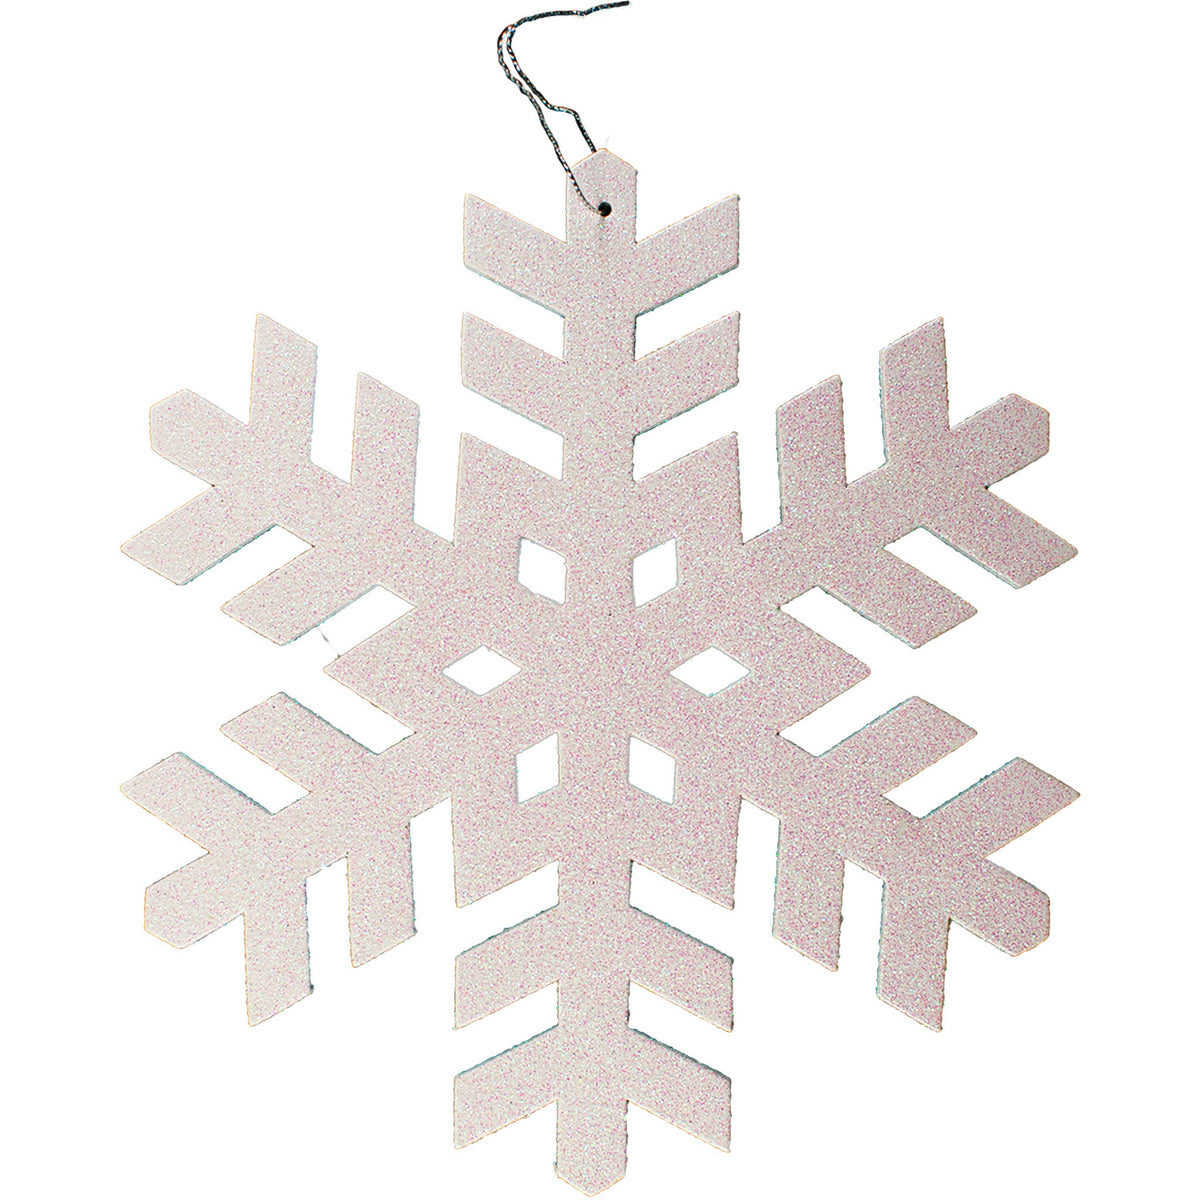 Indoor Outdoor Glittered Snowflakes Christmas Ornaments 12in